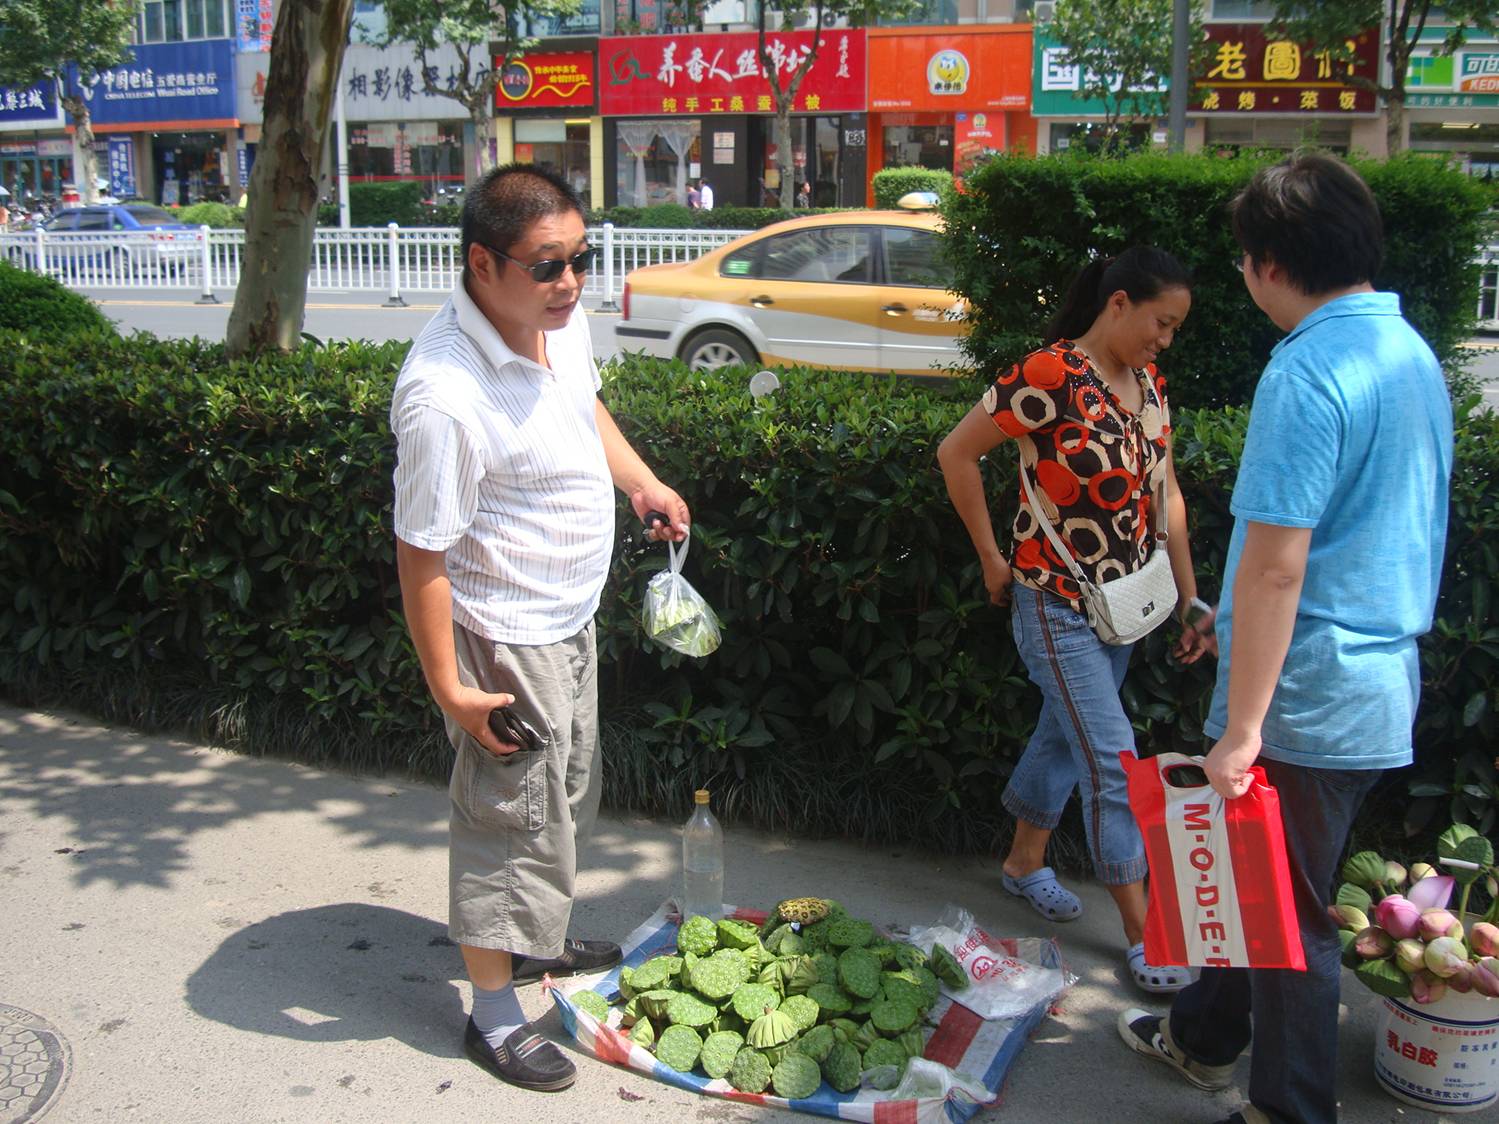 picture:  The street seller is trying to escape from the camera.  Lotus roots for sale on the streets of Wuxi, China